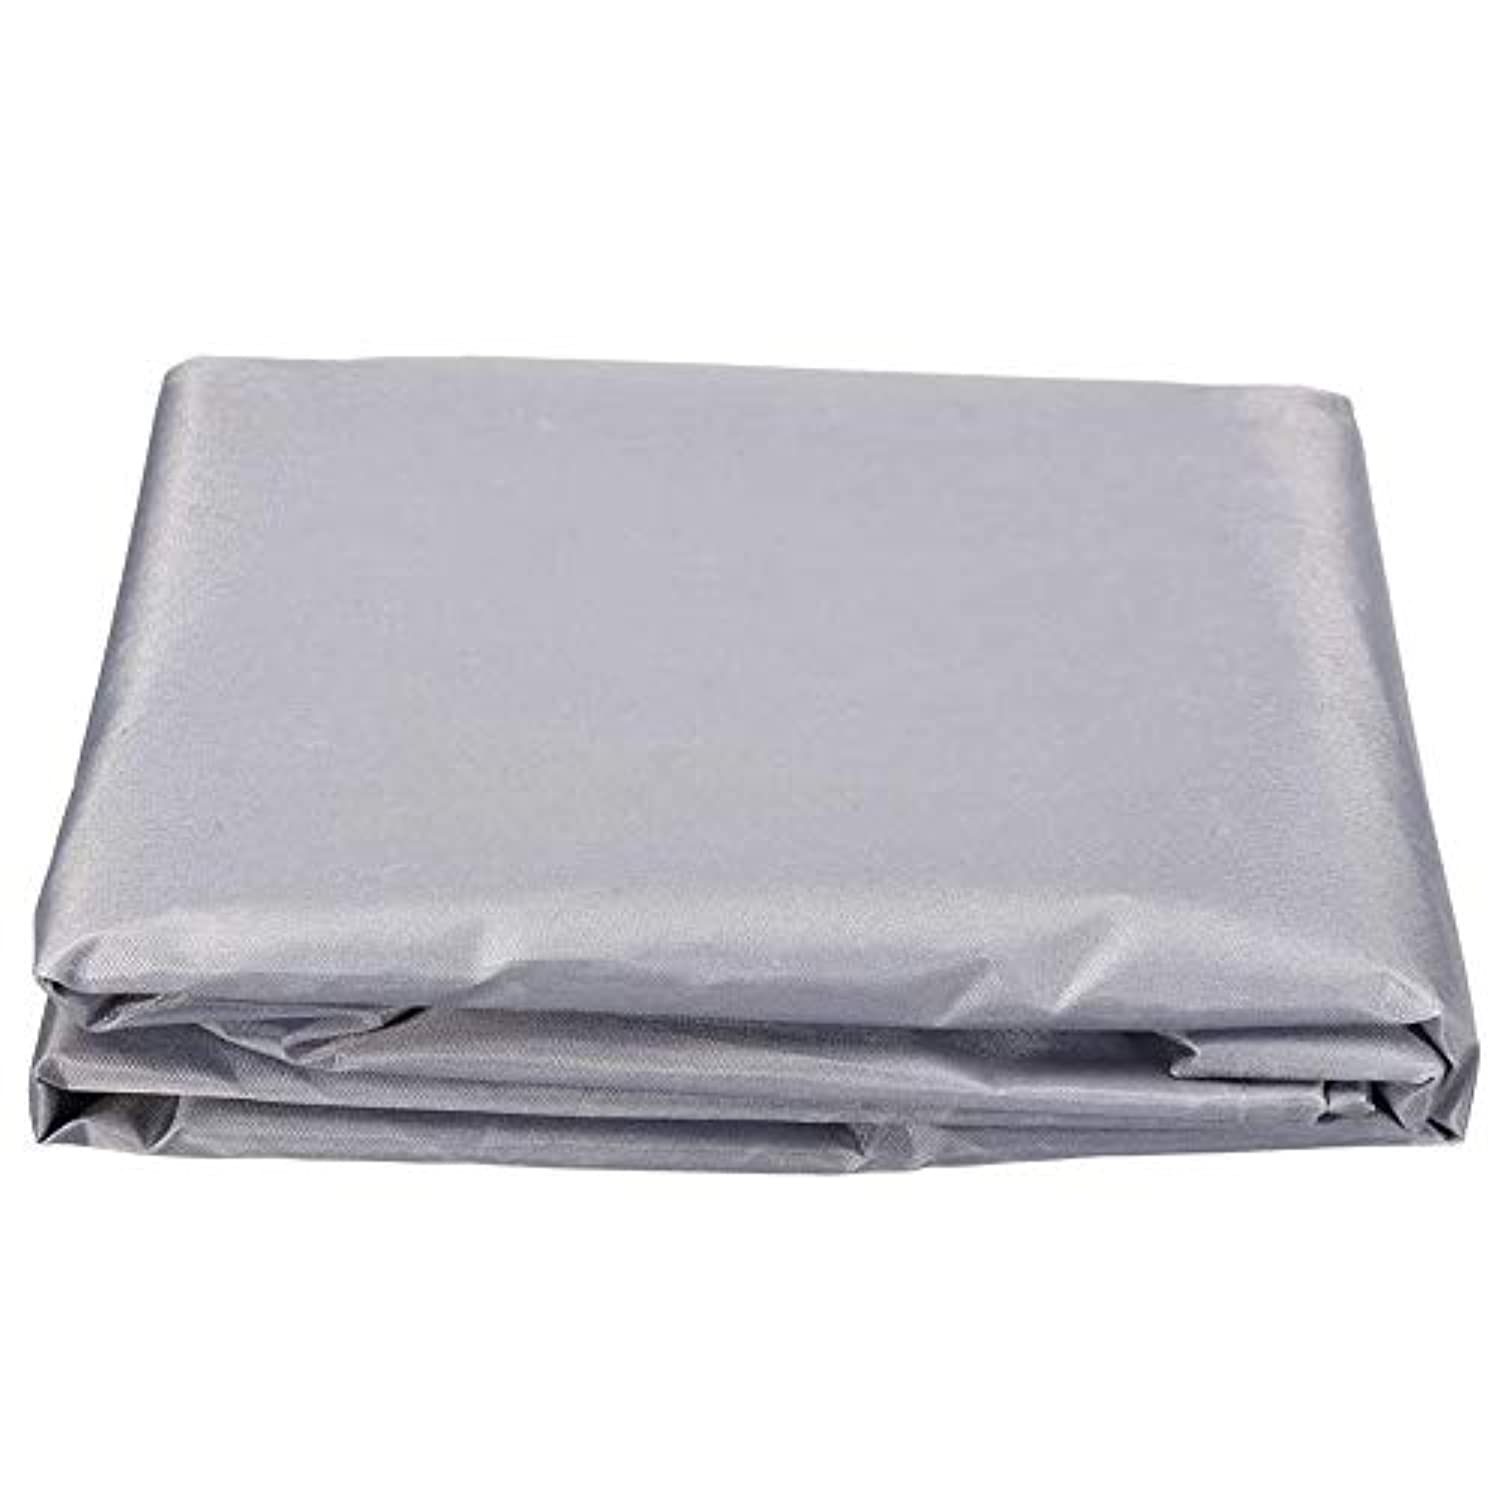 RIYIFER Treadmill Cover, Sports Running Machine Protective Folding Cover Dustproof Waterproof Cover Aluminum Film + Cotton Material-with Storage Bag,Gray,S